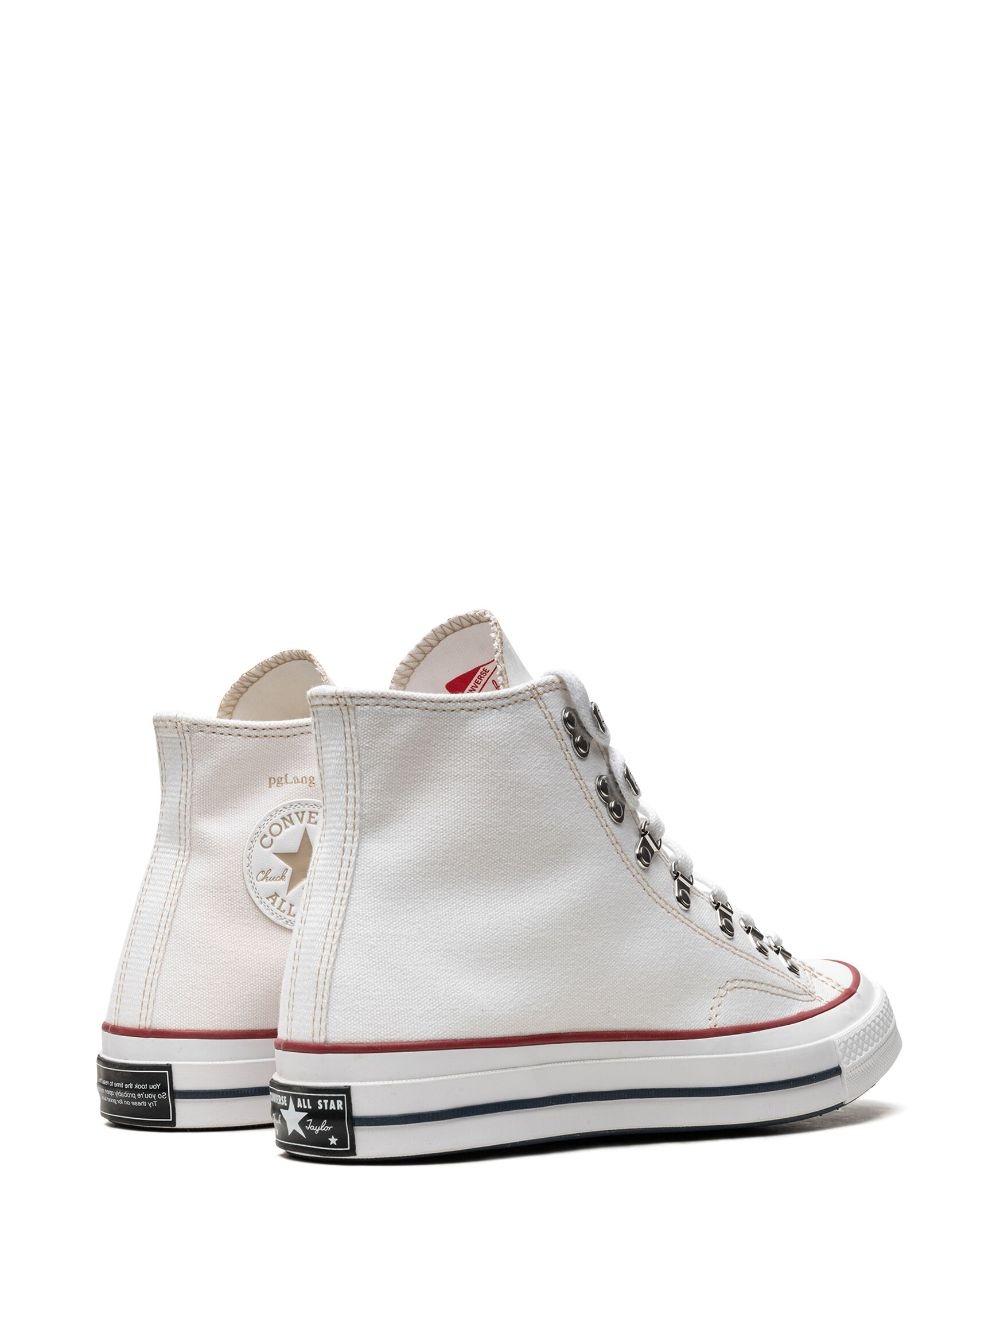 Chuck Taylor All-Star 70 Hi "pgLang White" sneakers - 3